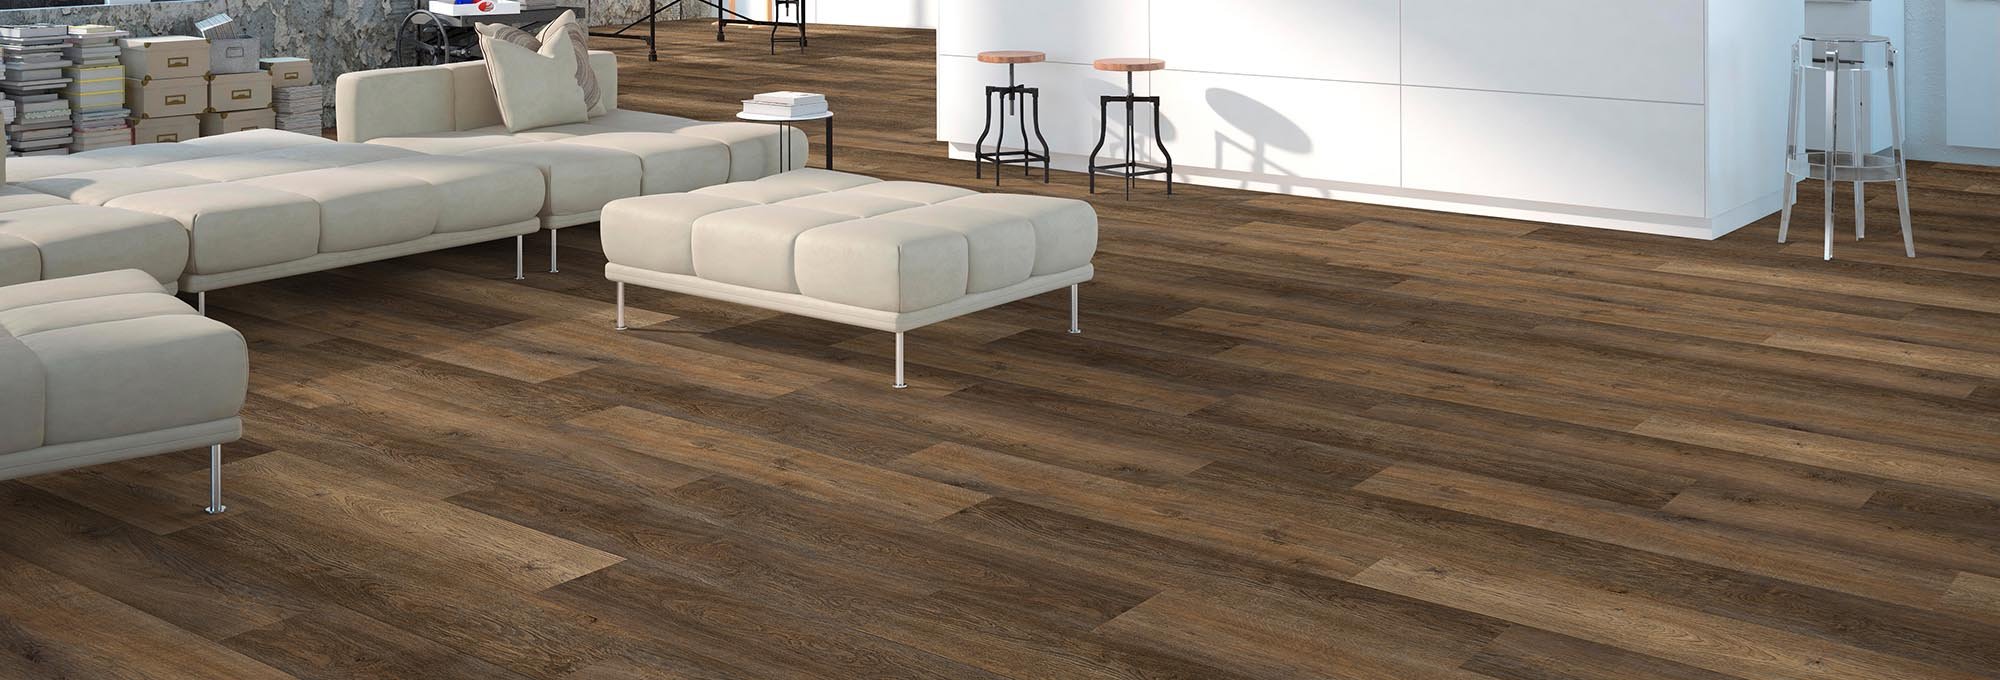 Shop Flooring Products from At Home Floors in Largo, FL